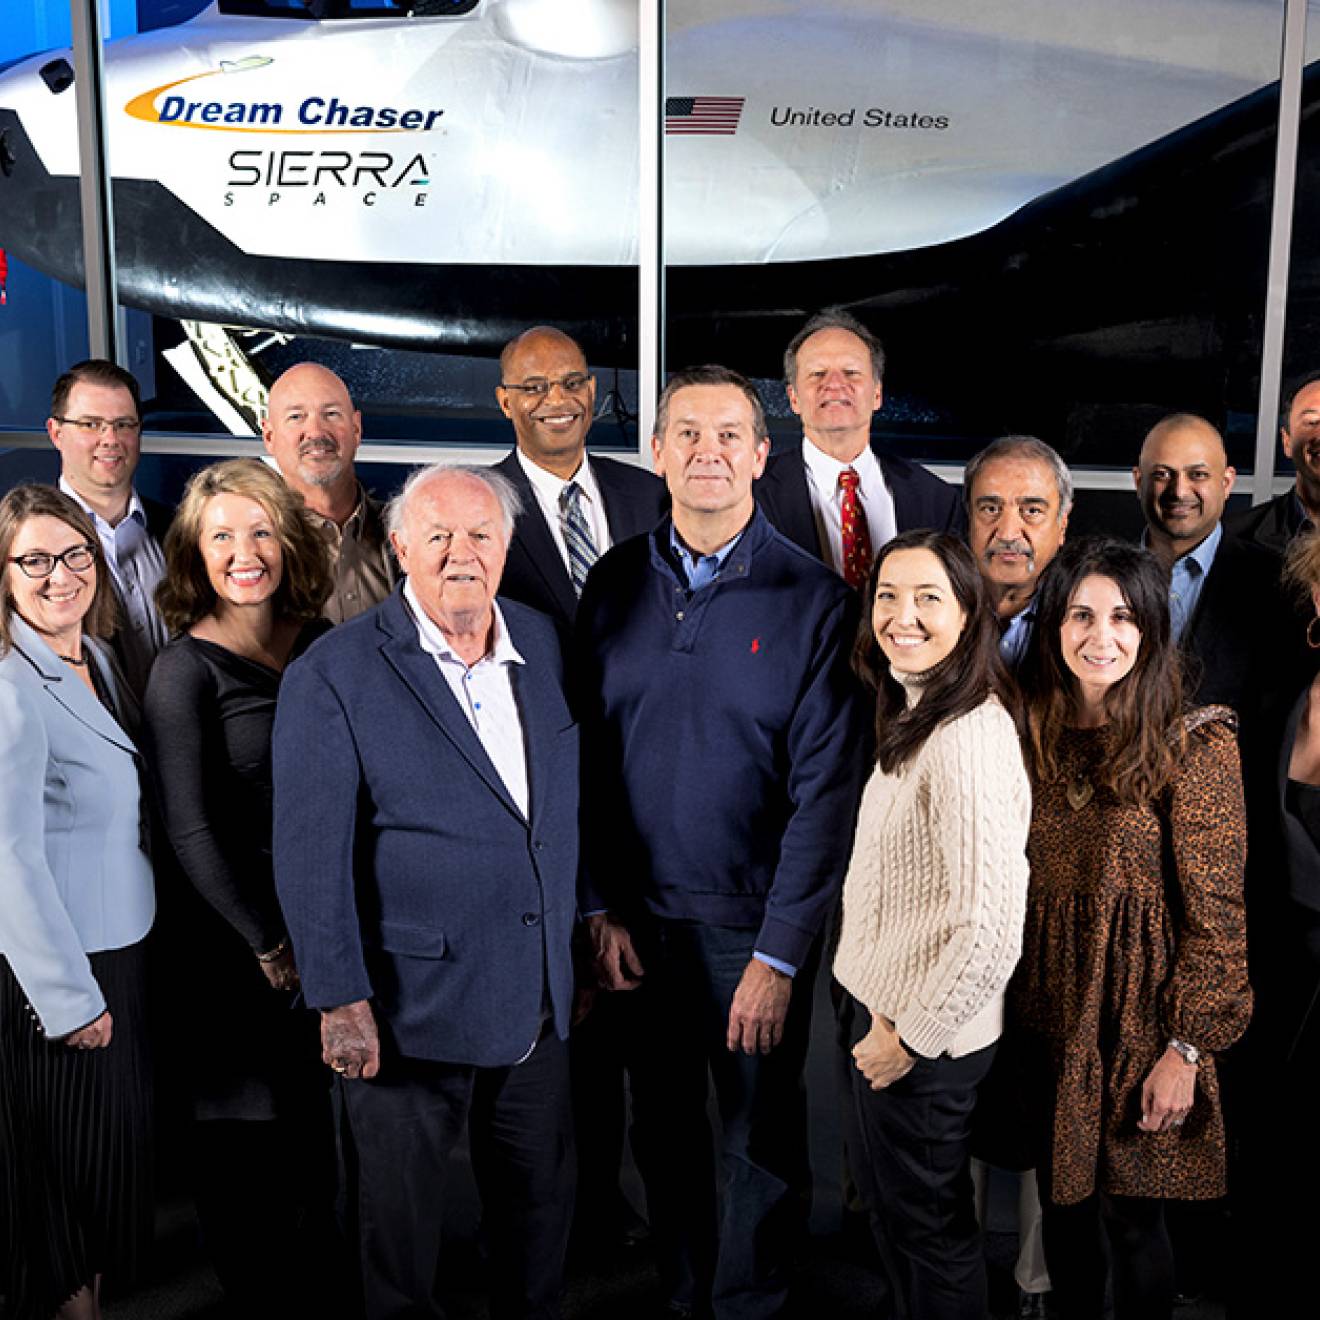 Group photo in front of a space vehicle